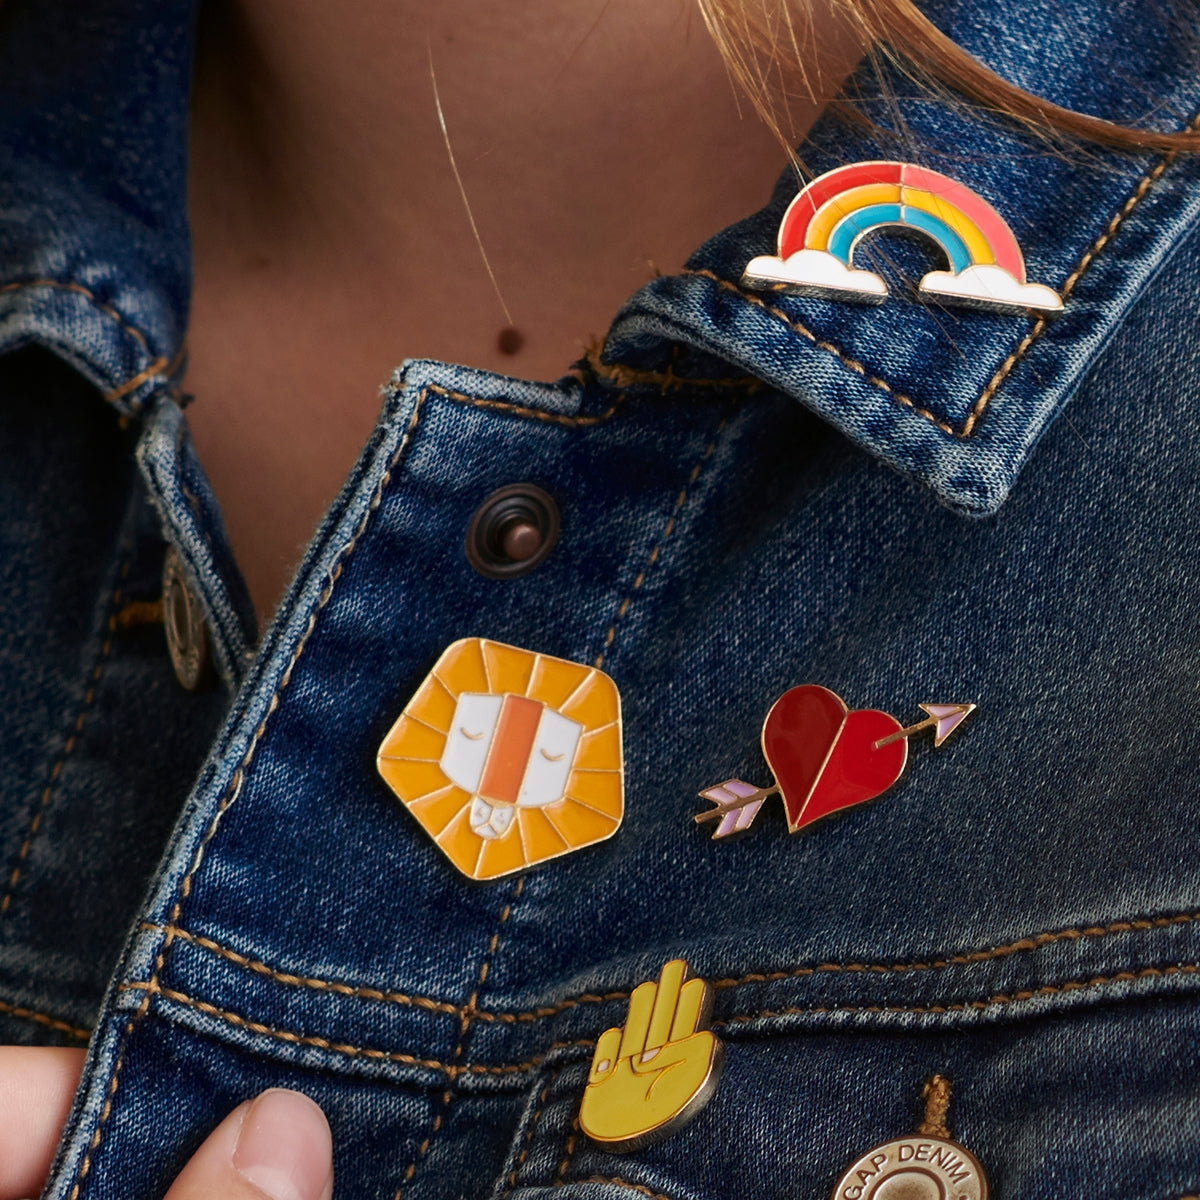 Set of 4 children's character badge enamel pins featuring the traits Curious, Honest, Perseverance, and Brave, perfect for personalizing kids' jackets, bags, or hats, shown on a denim jacket.